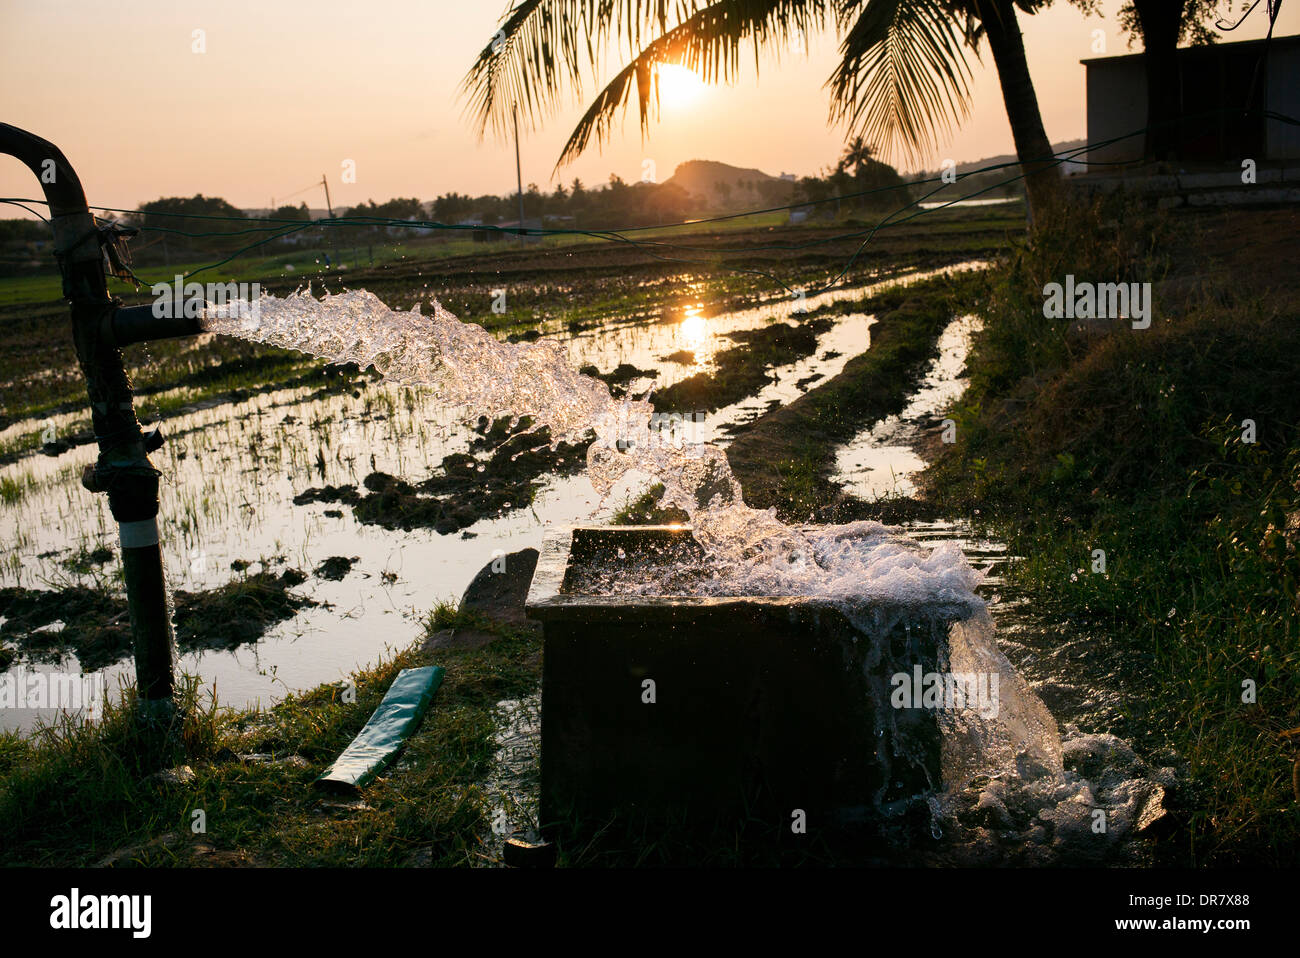 Flooding rice paddy fields with water from a pump at sunset. Andhra Pradesh, India Stock Photo